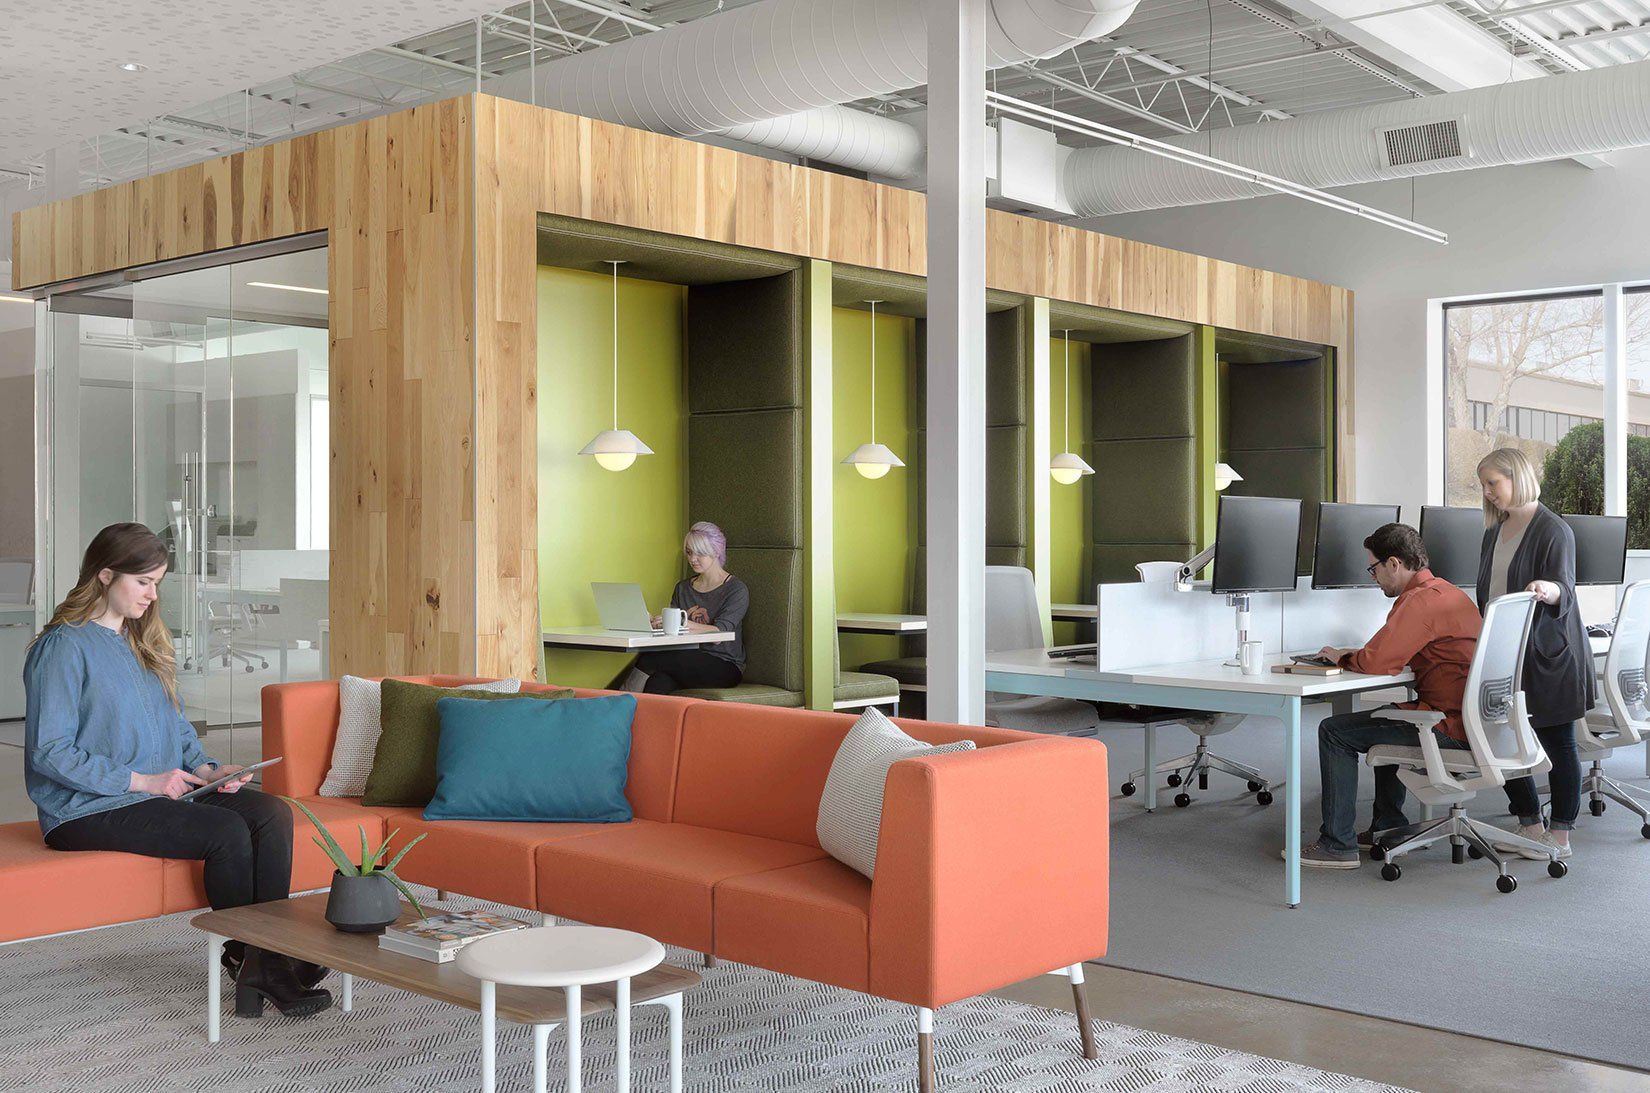 Commercial Office Design Trends for 2020